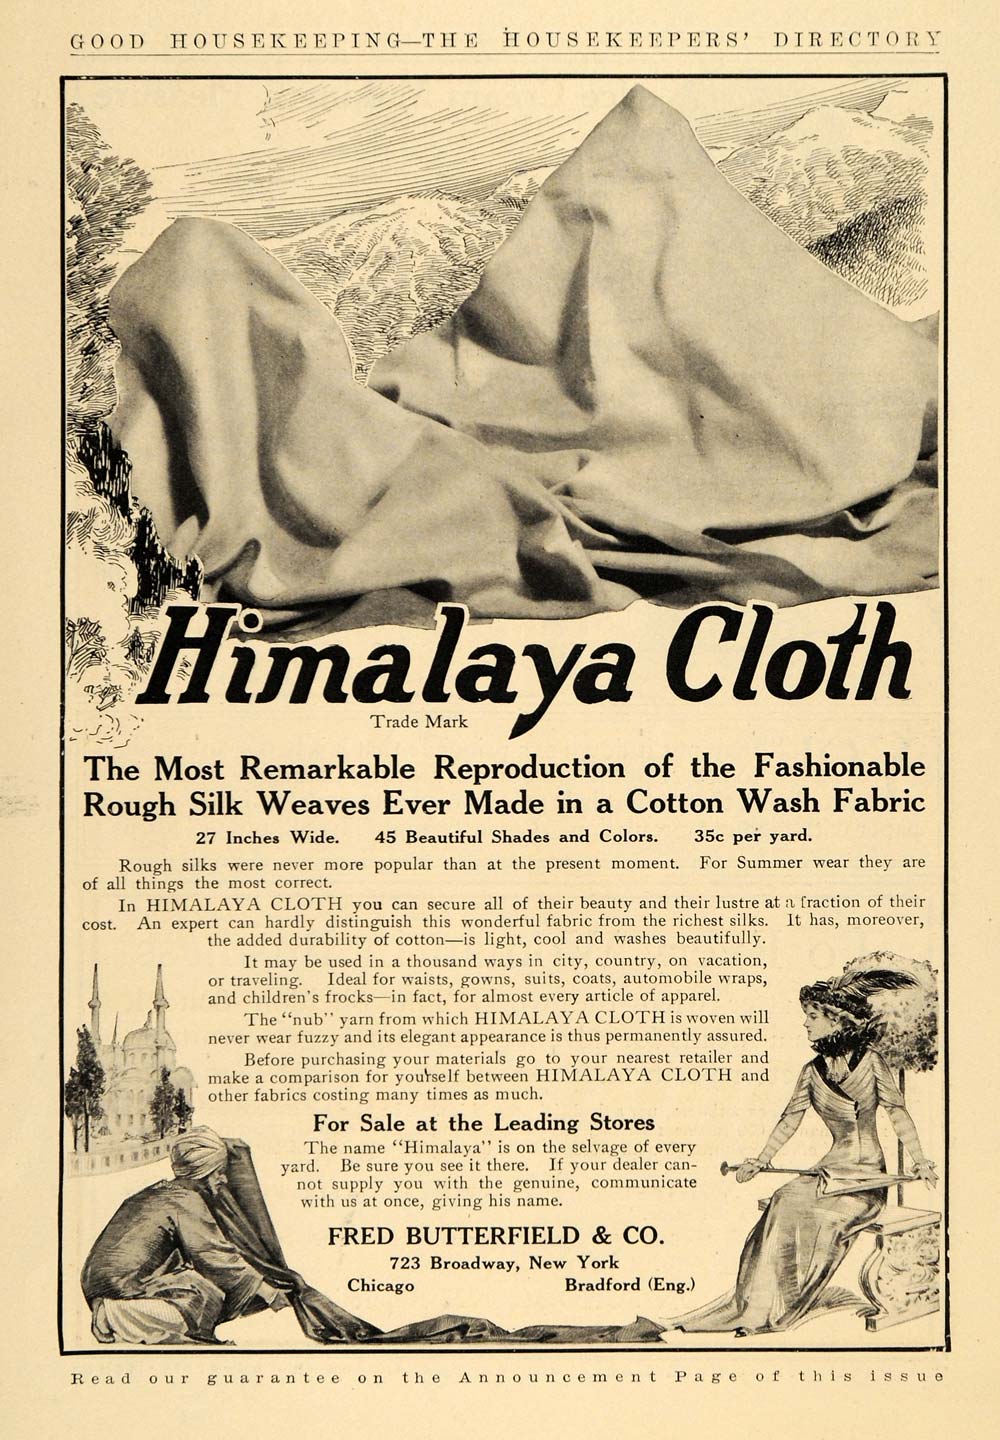 1909 Ad Himalaya Cloth Fred Butterfield Co. Broadway NY - ORIGINAL GH3